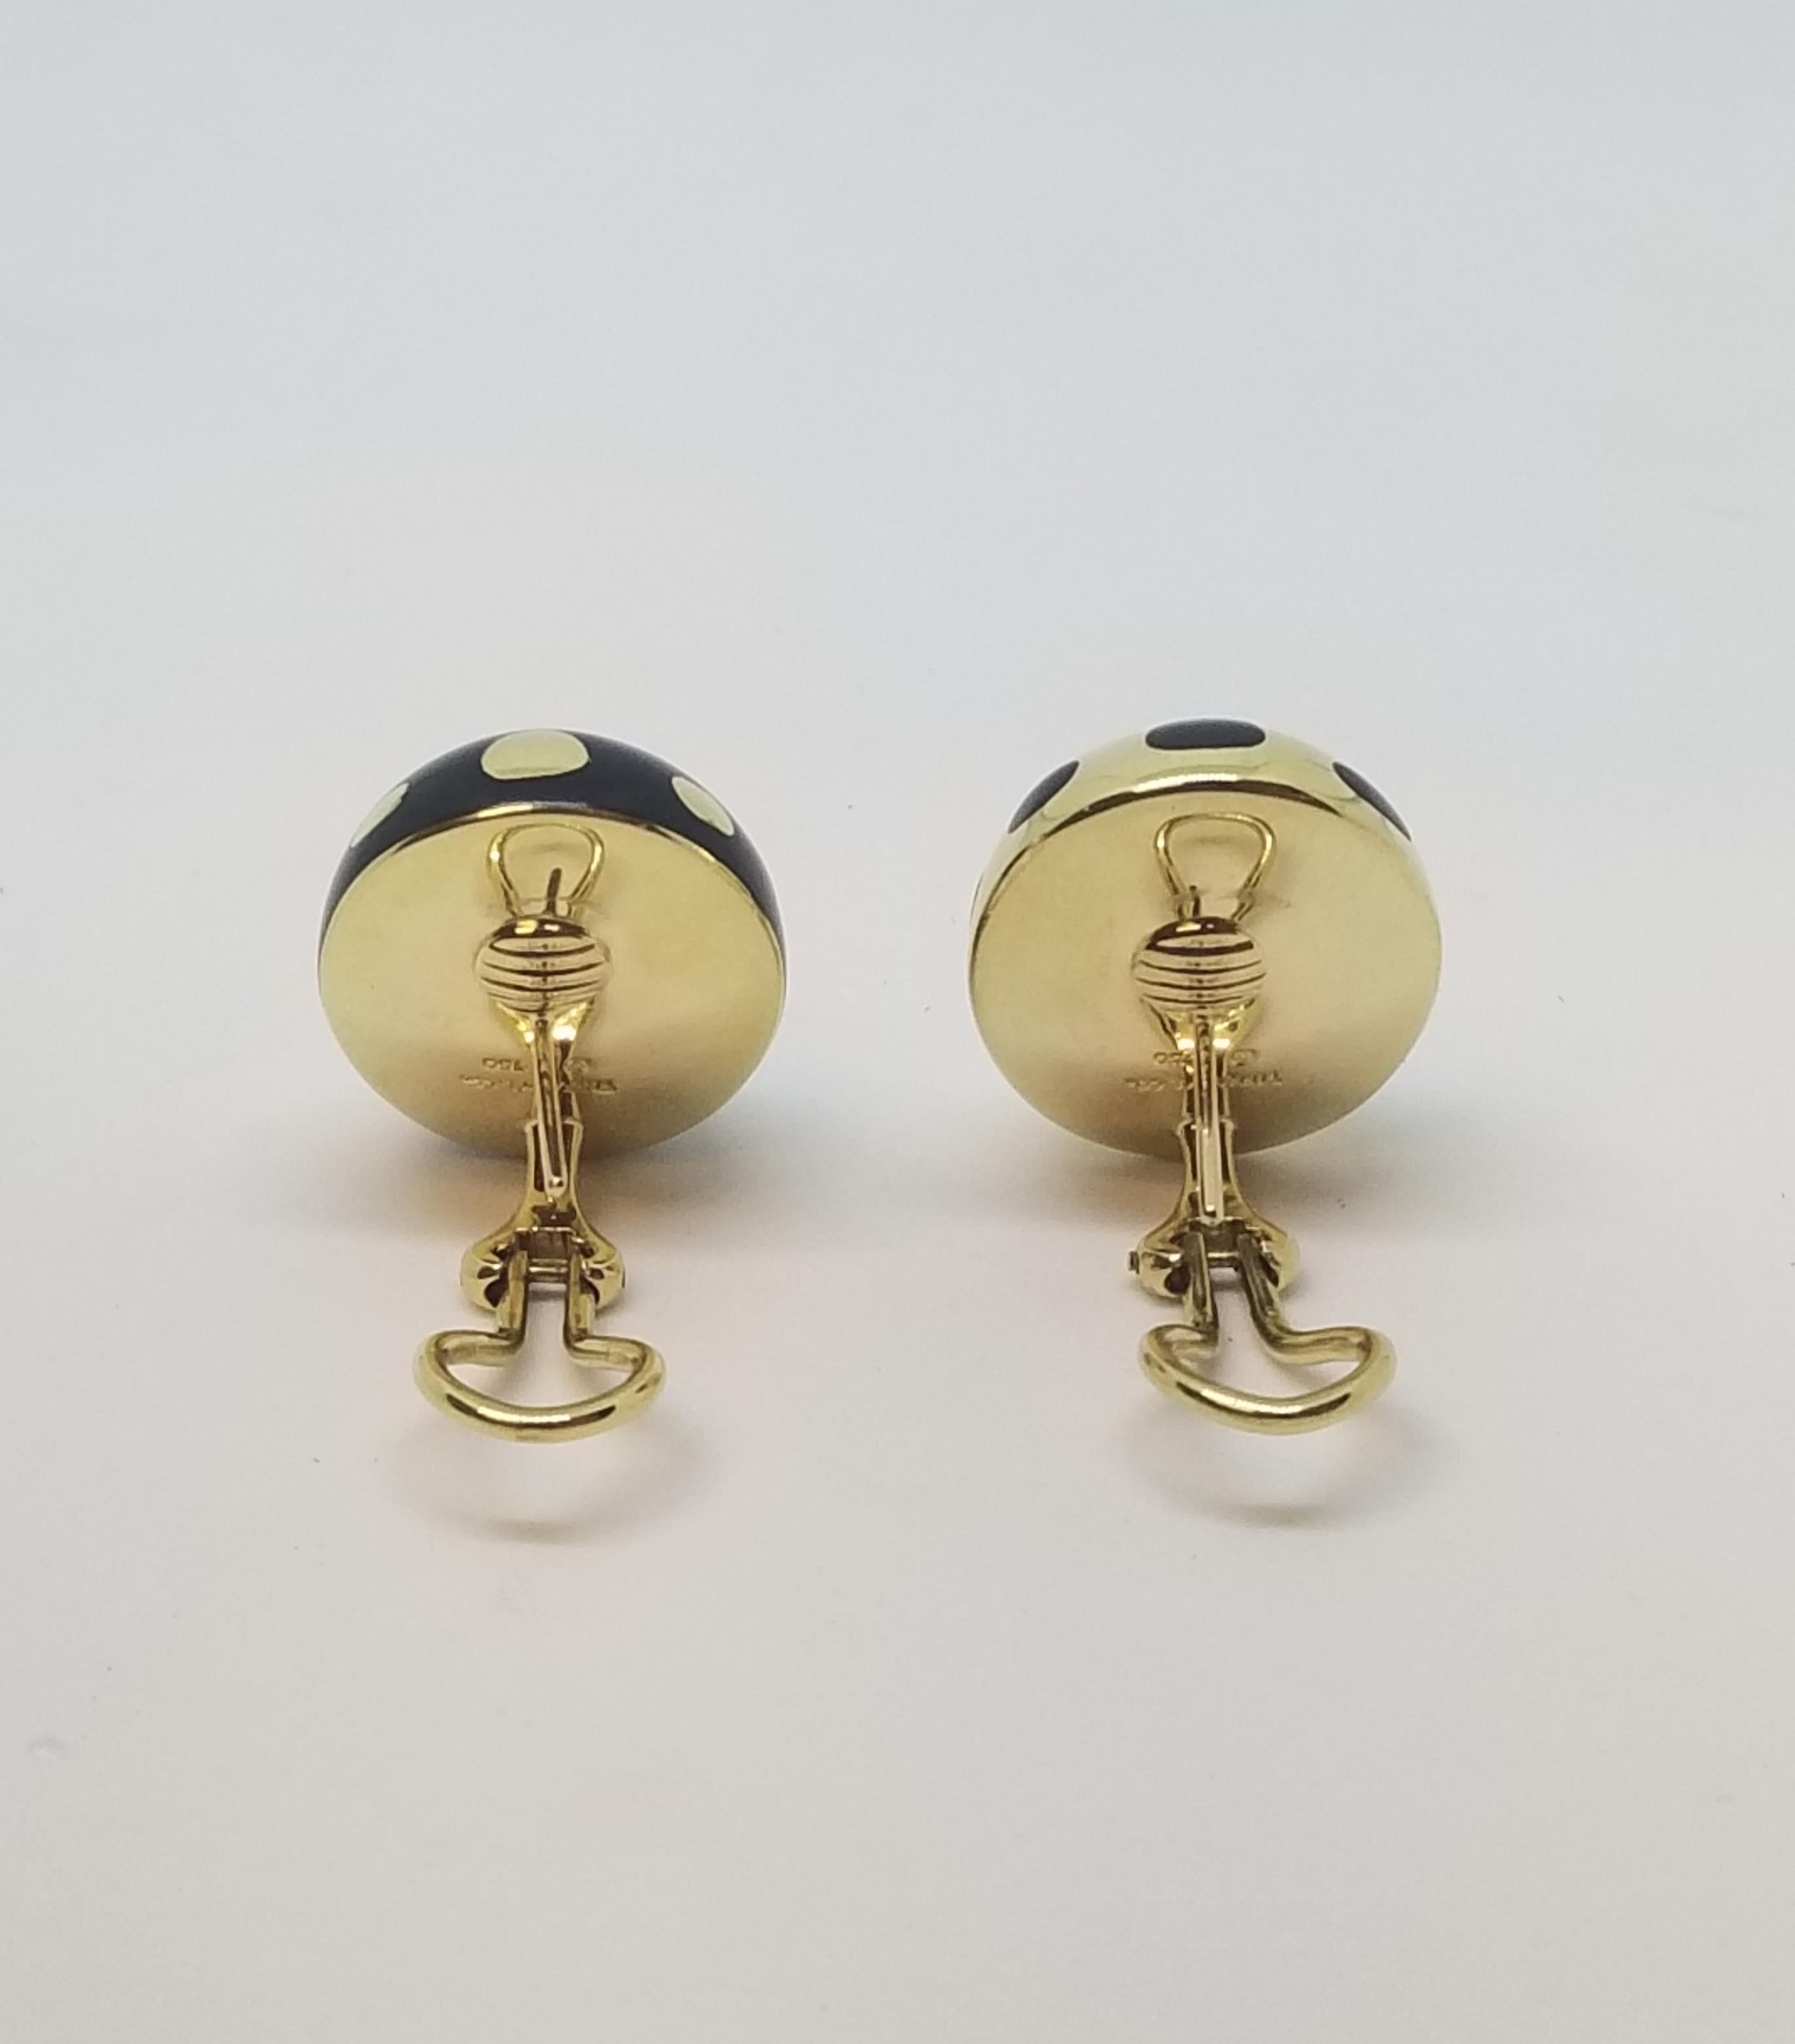 Strikingly handsome these egg shaped Angela Cummings for Tiffany & Co 18 karat yellow gold and black jade earrings are a must have wardrobe accessory.  With a black and gold positive/negative organic dot design, the circa 2000 earrings are a